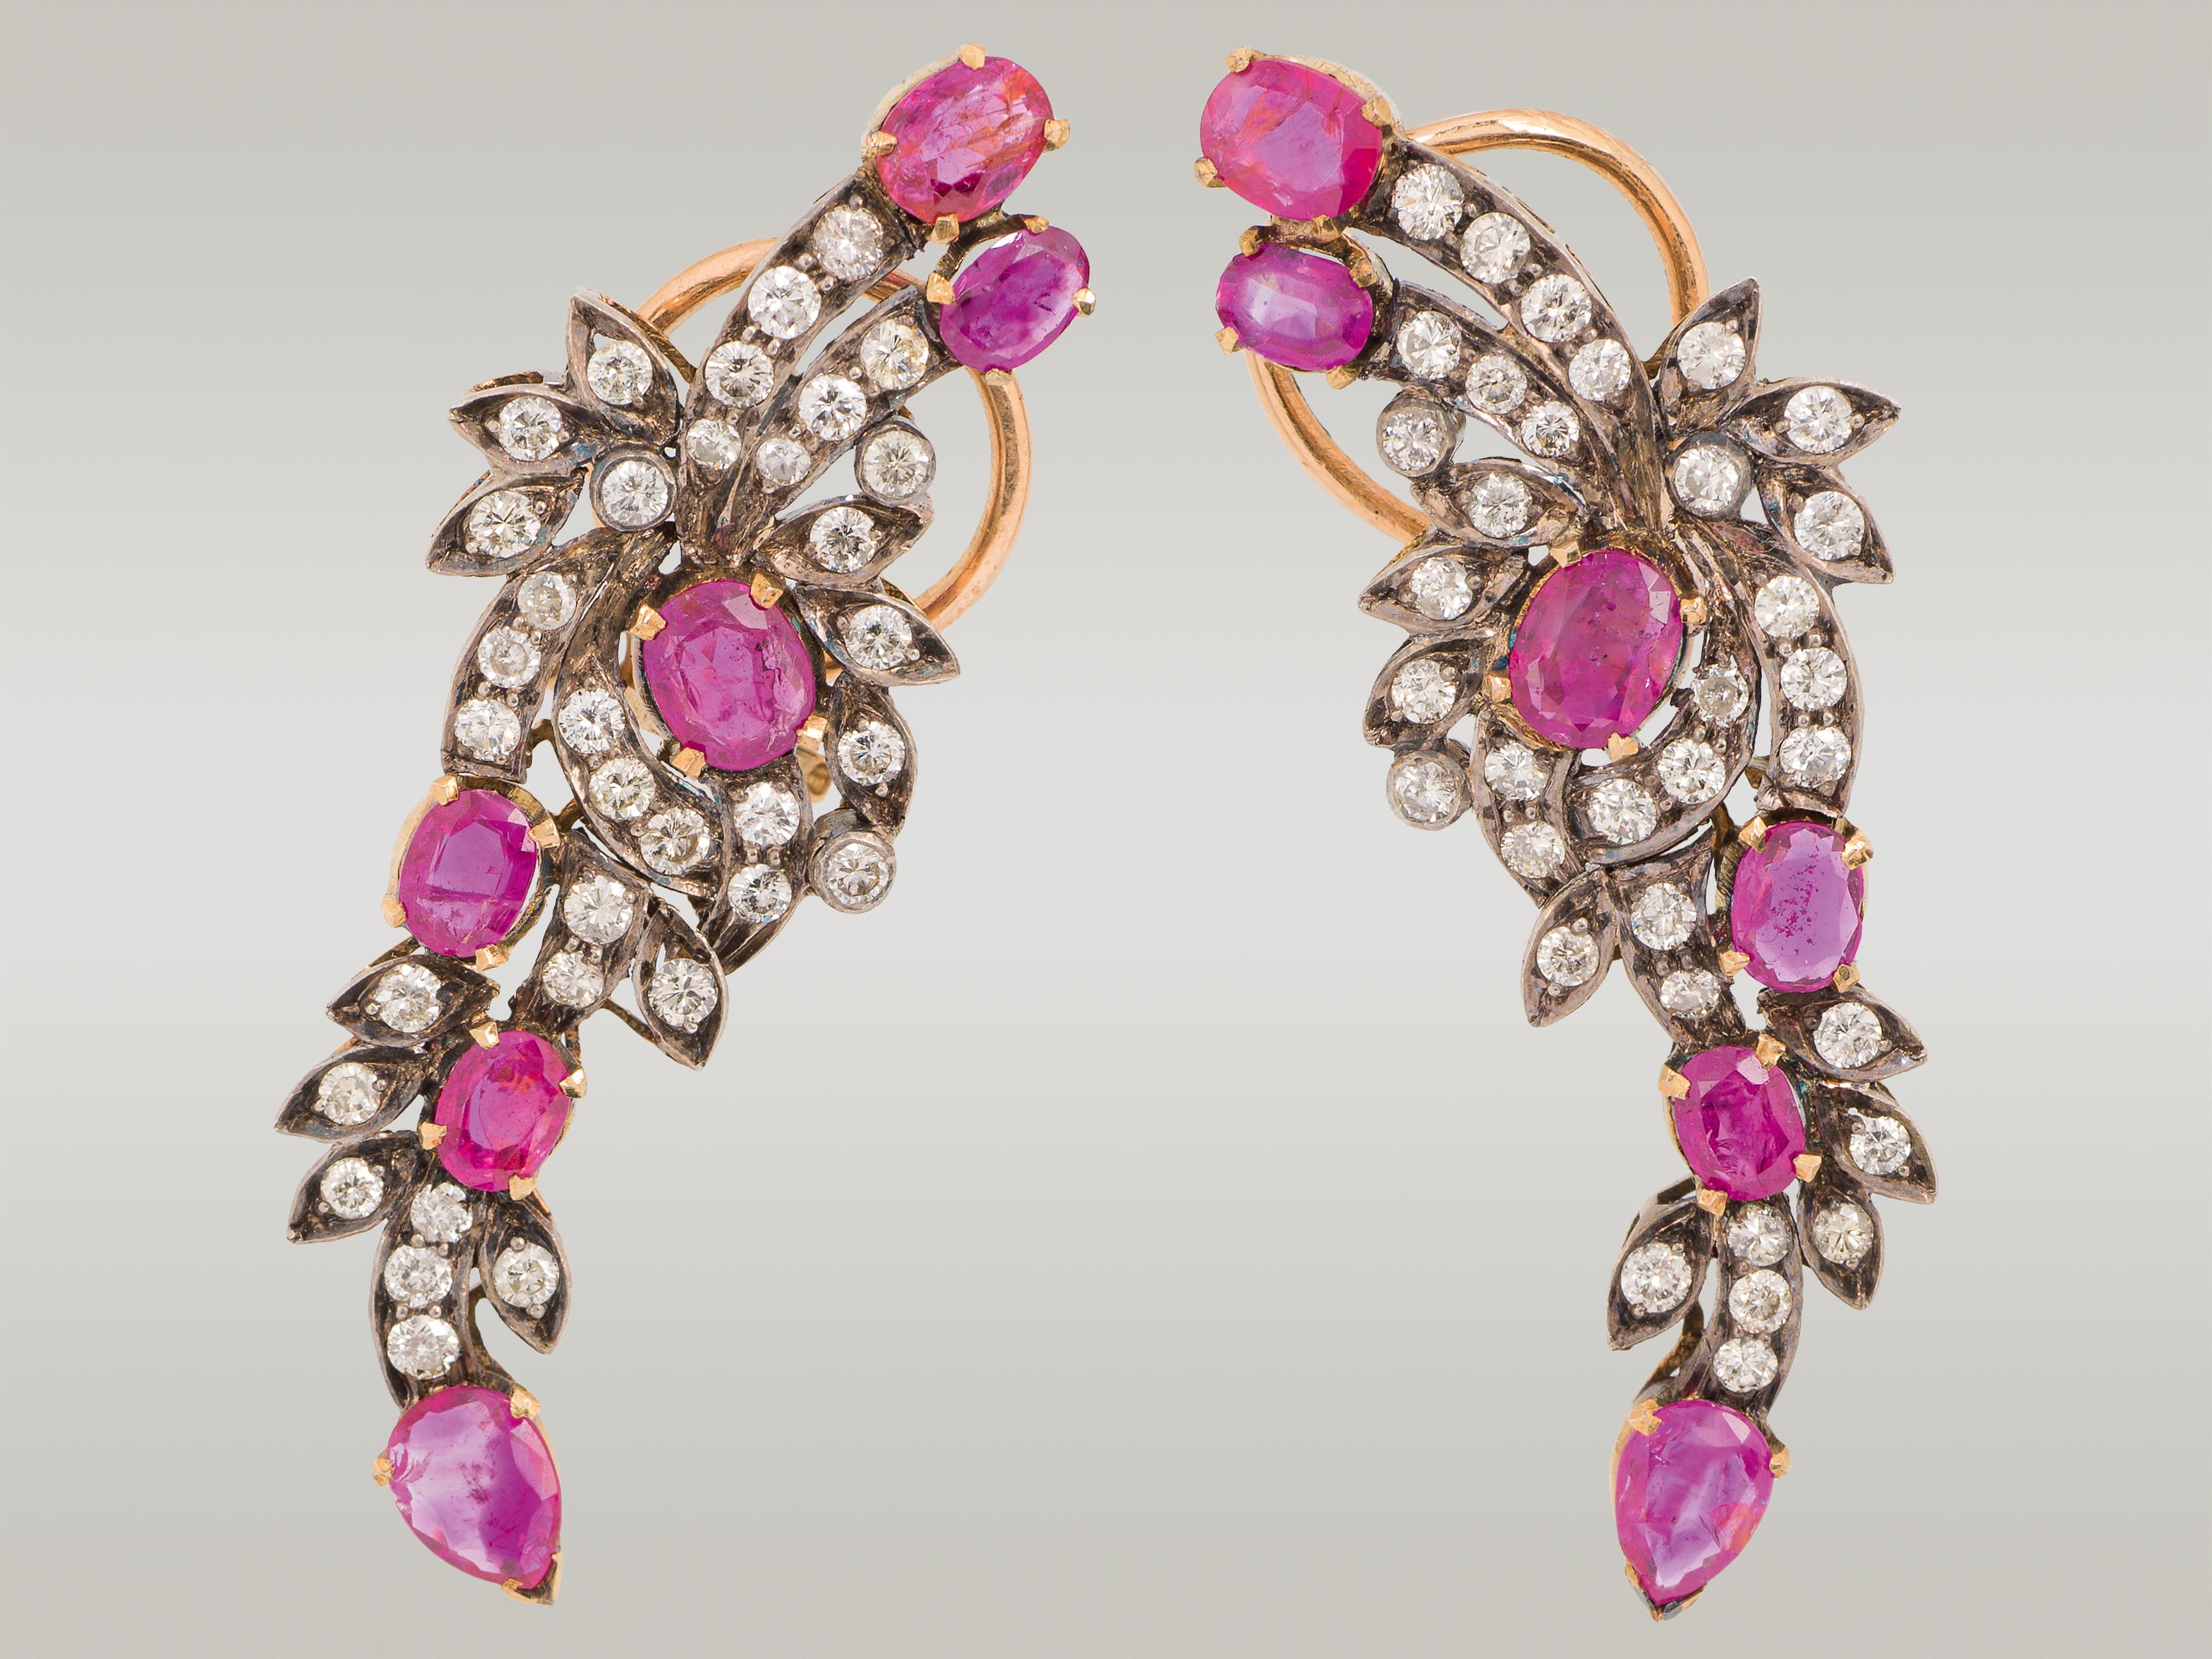 Pink sapphire earrings with diamonds